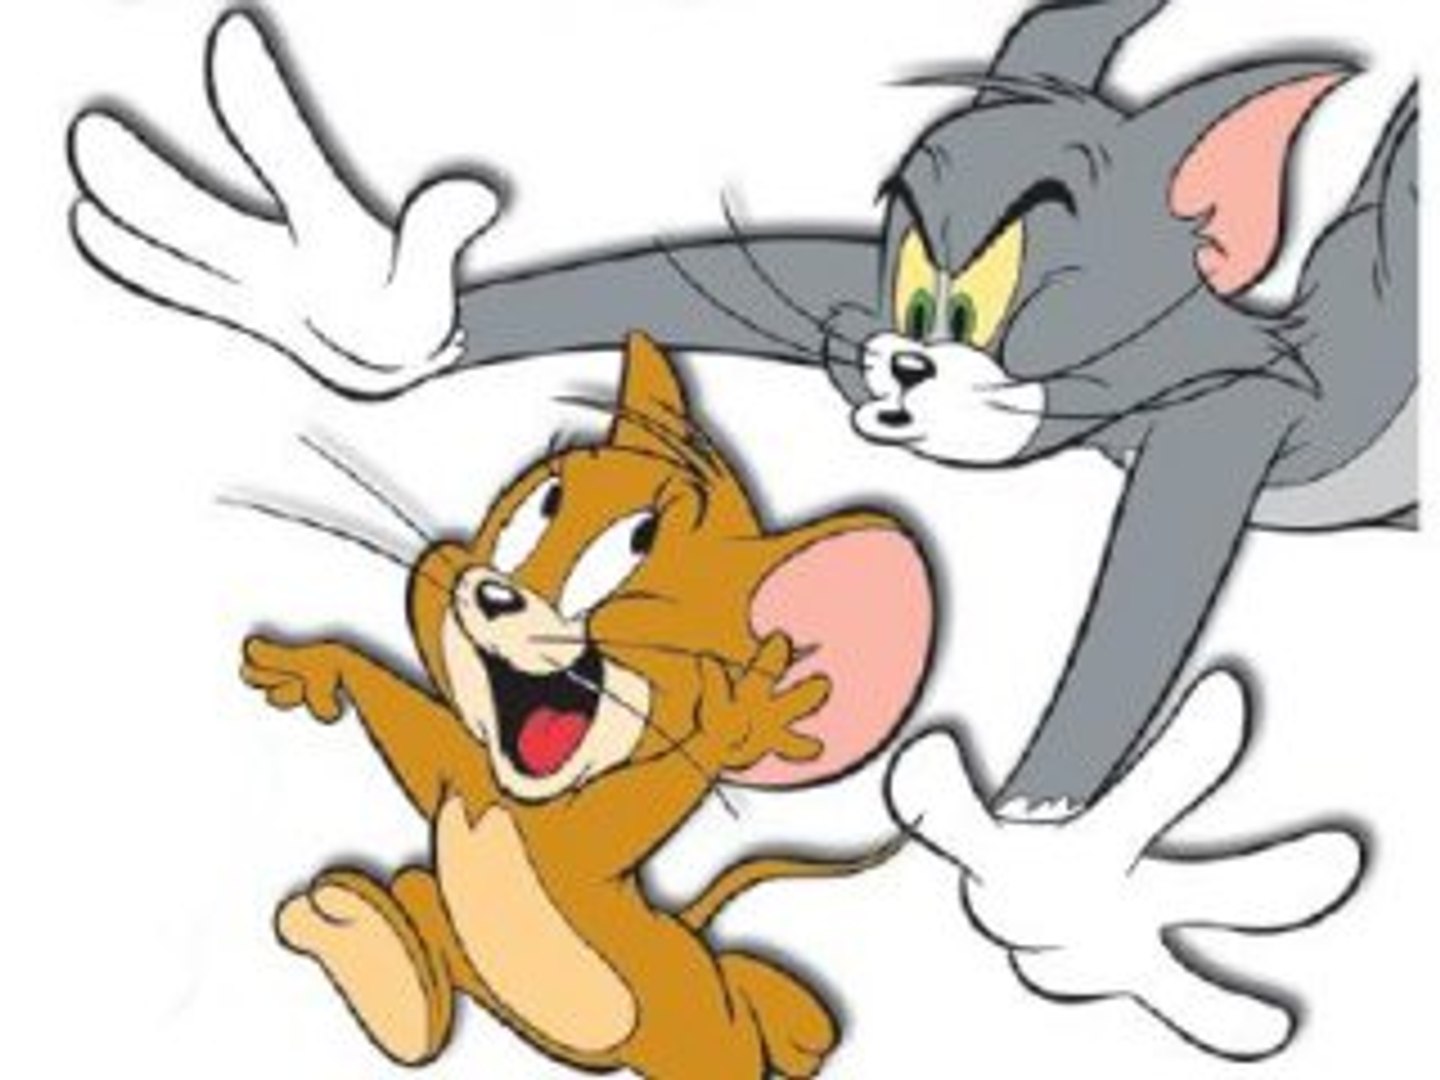 tom and jerry cartoon 01 - video Dailymotion